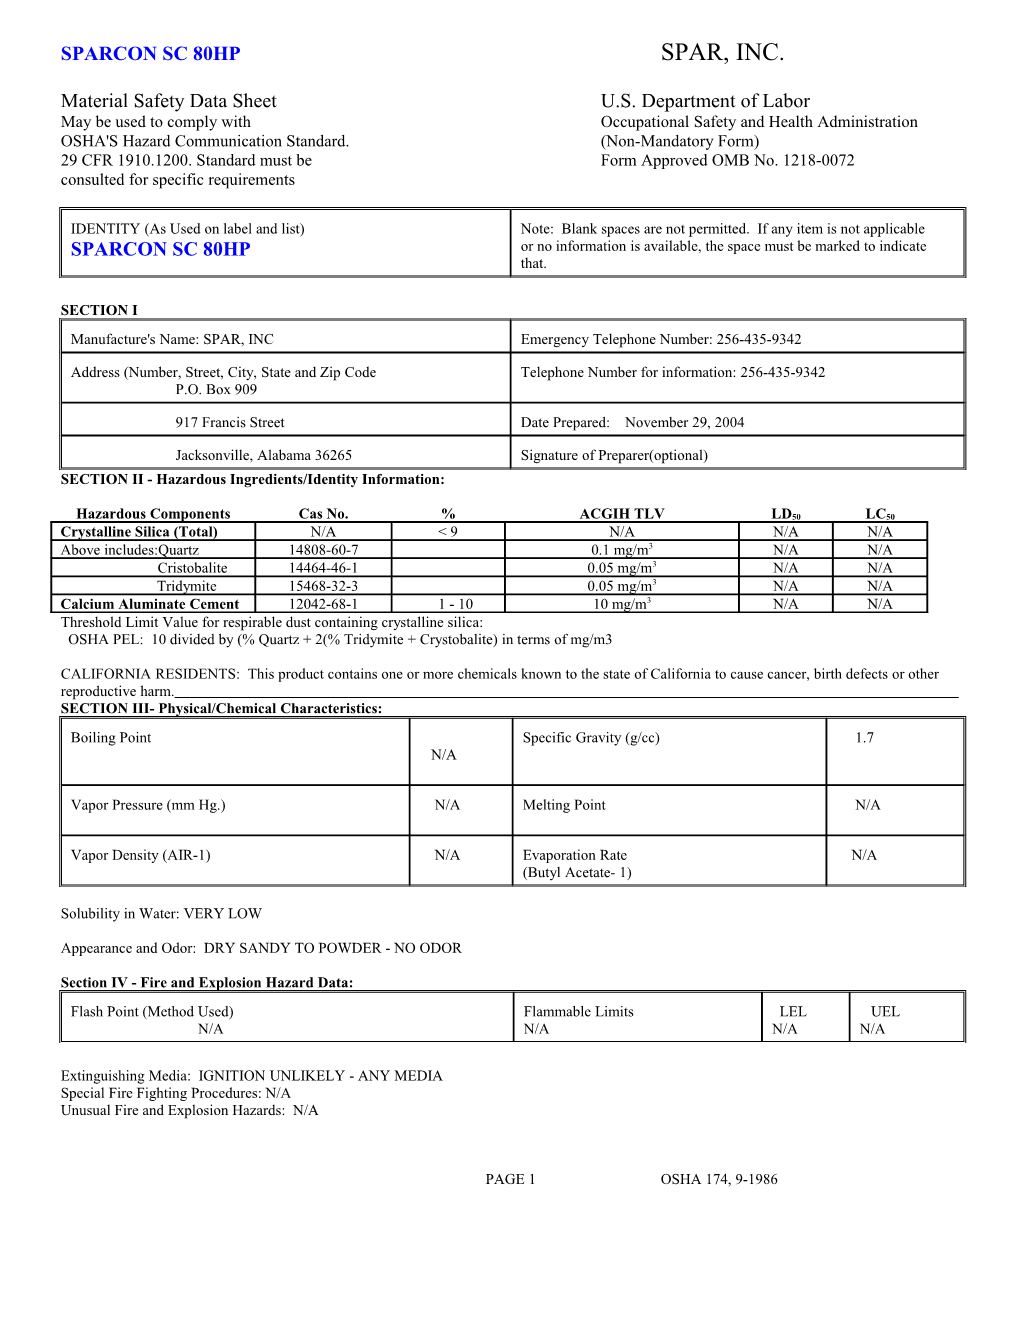 Material Safety Data Sheetu.S. Department of Labor